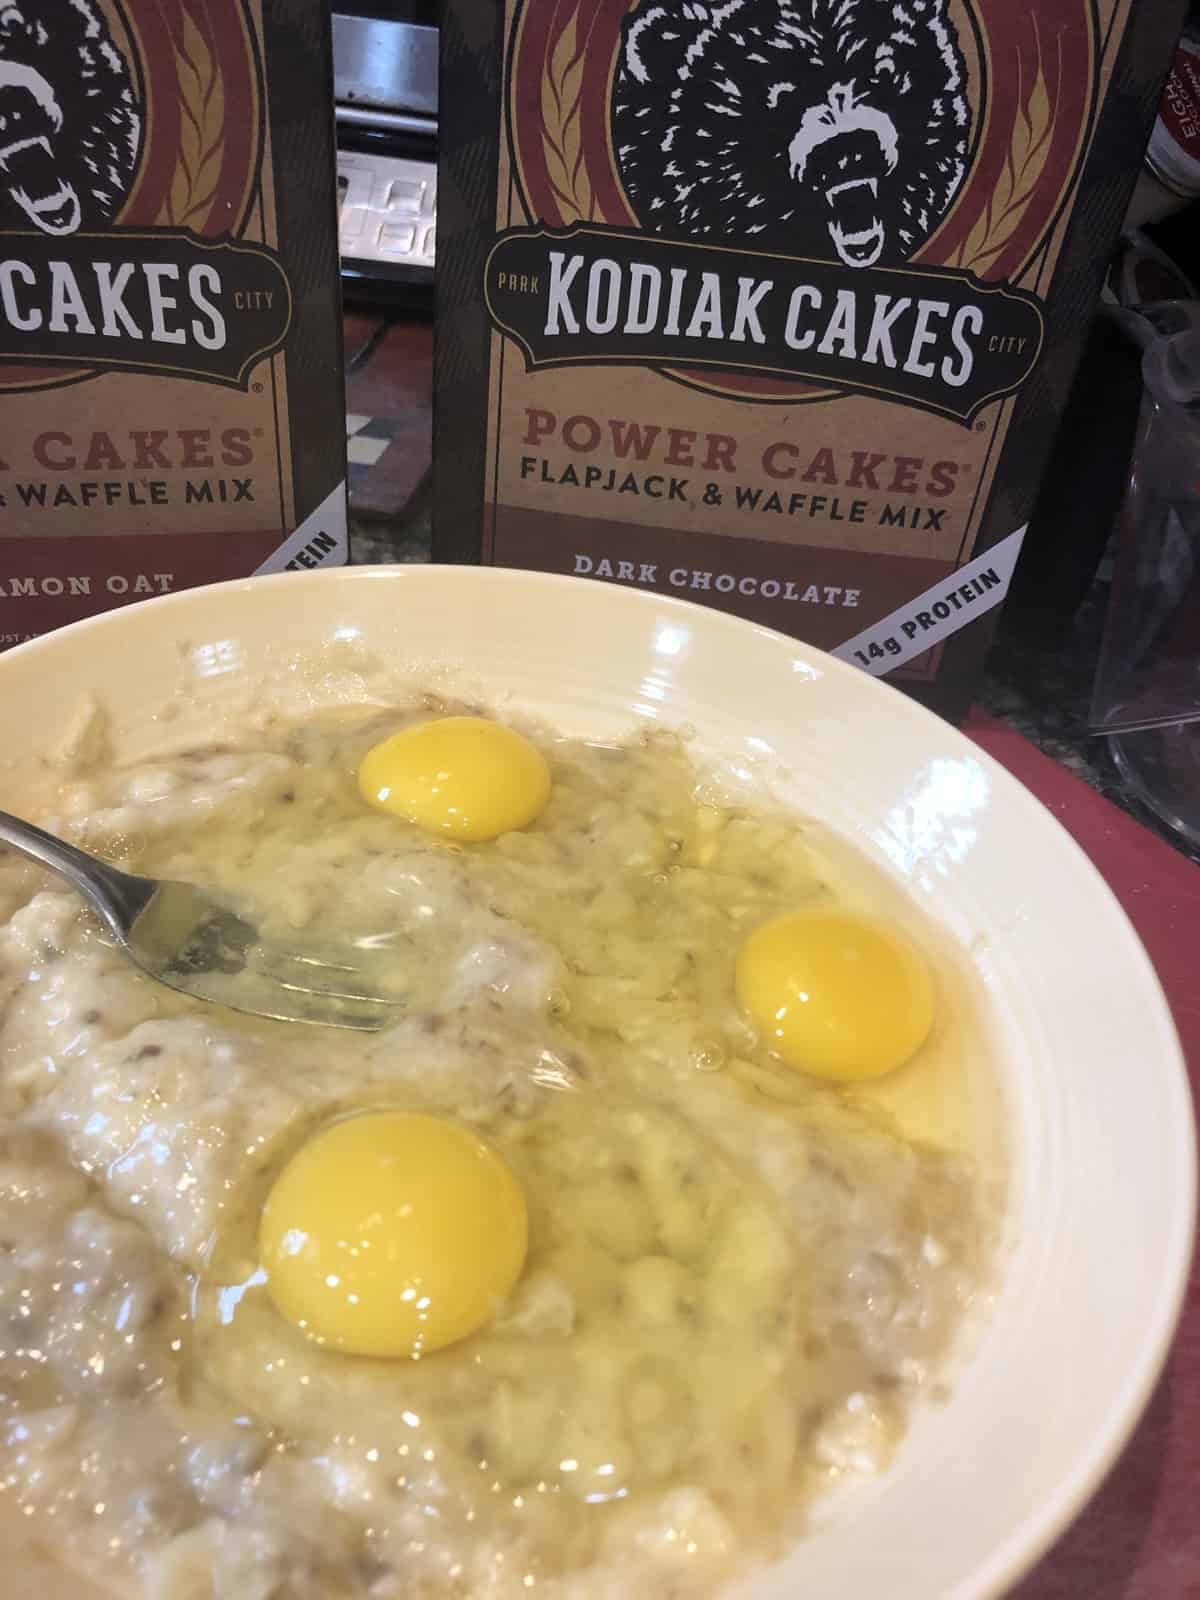 Cinnamon Oat Banana and egg Batter with a box of Kodiak Cakes Power Cakes mix